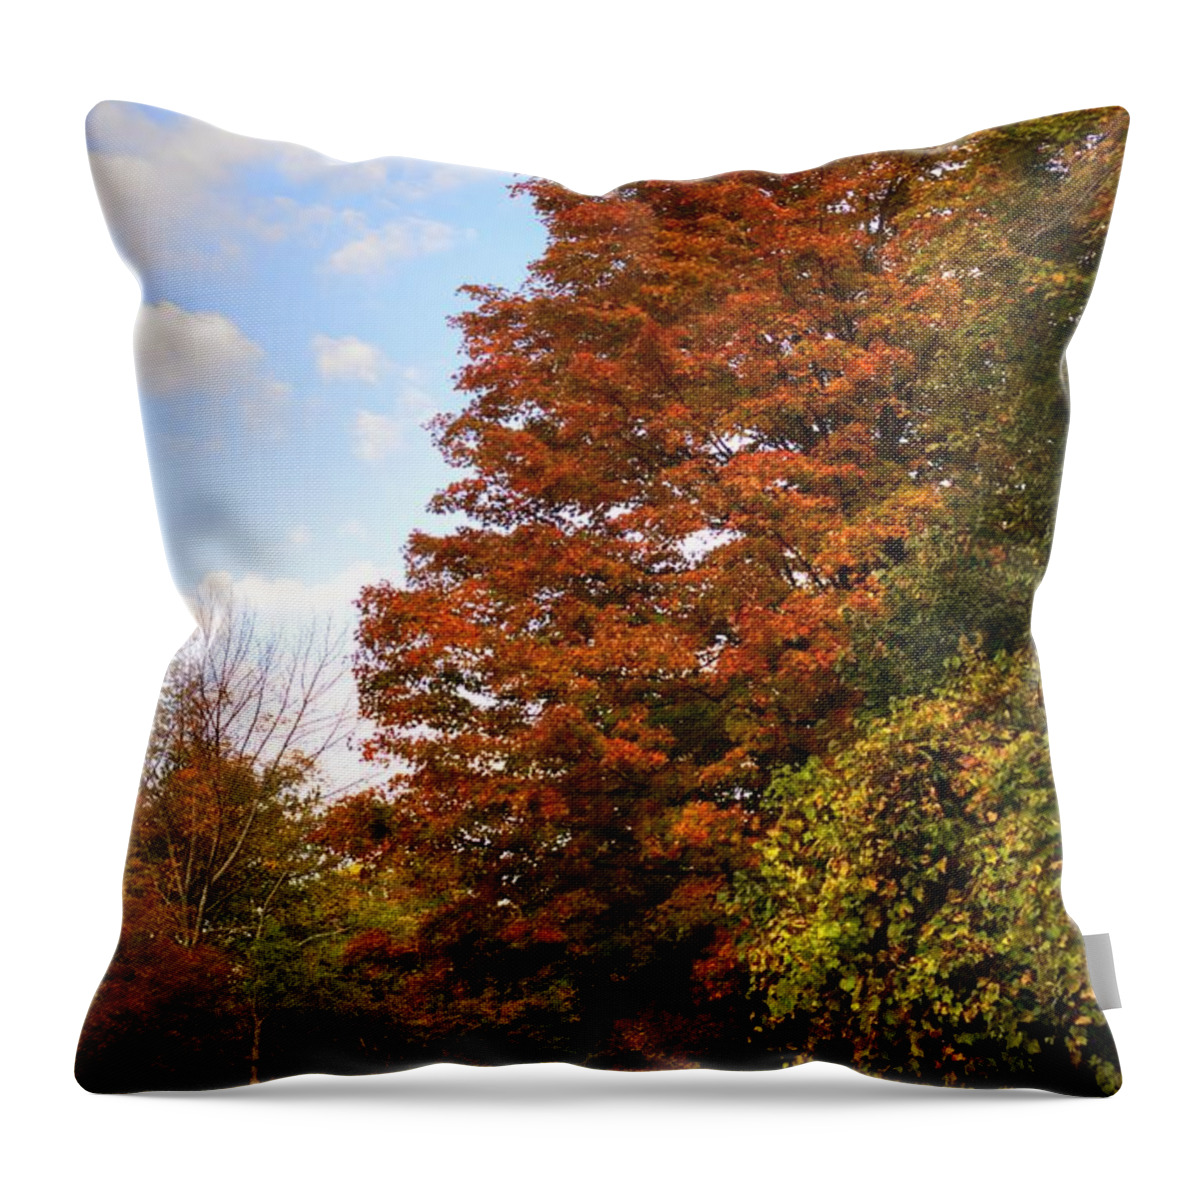 Fall Throw Pillow featuring the photograph Fall Foliage1 by Deborah Ritch